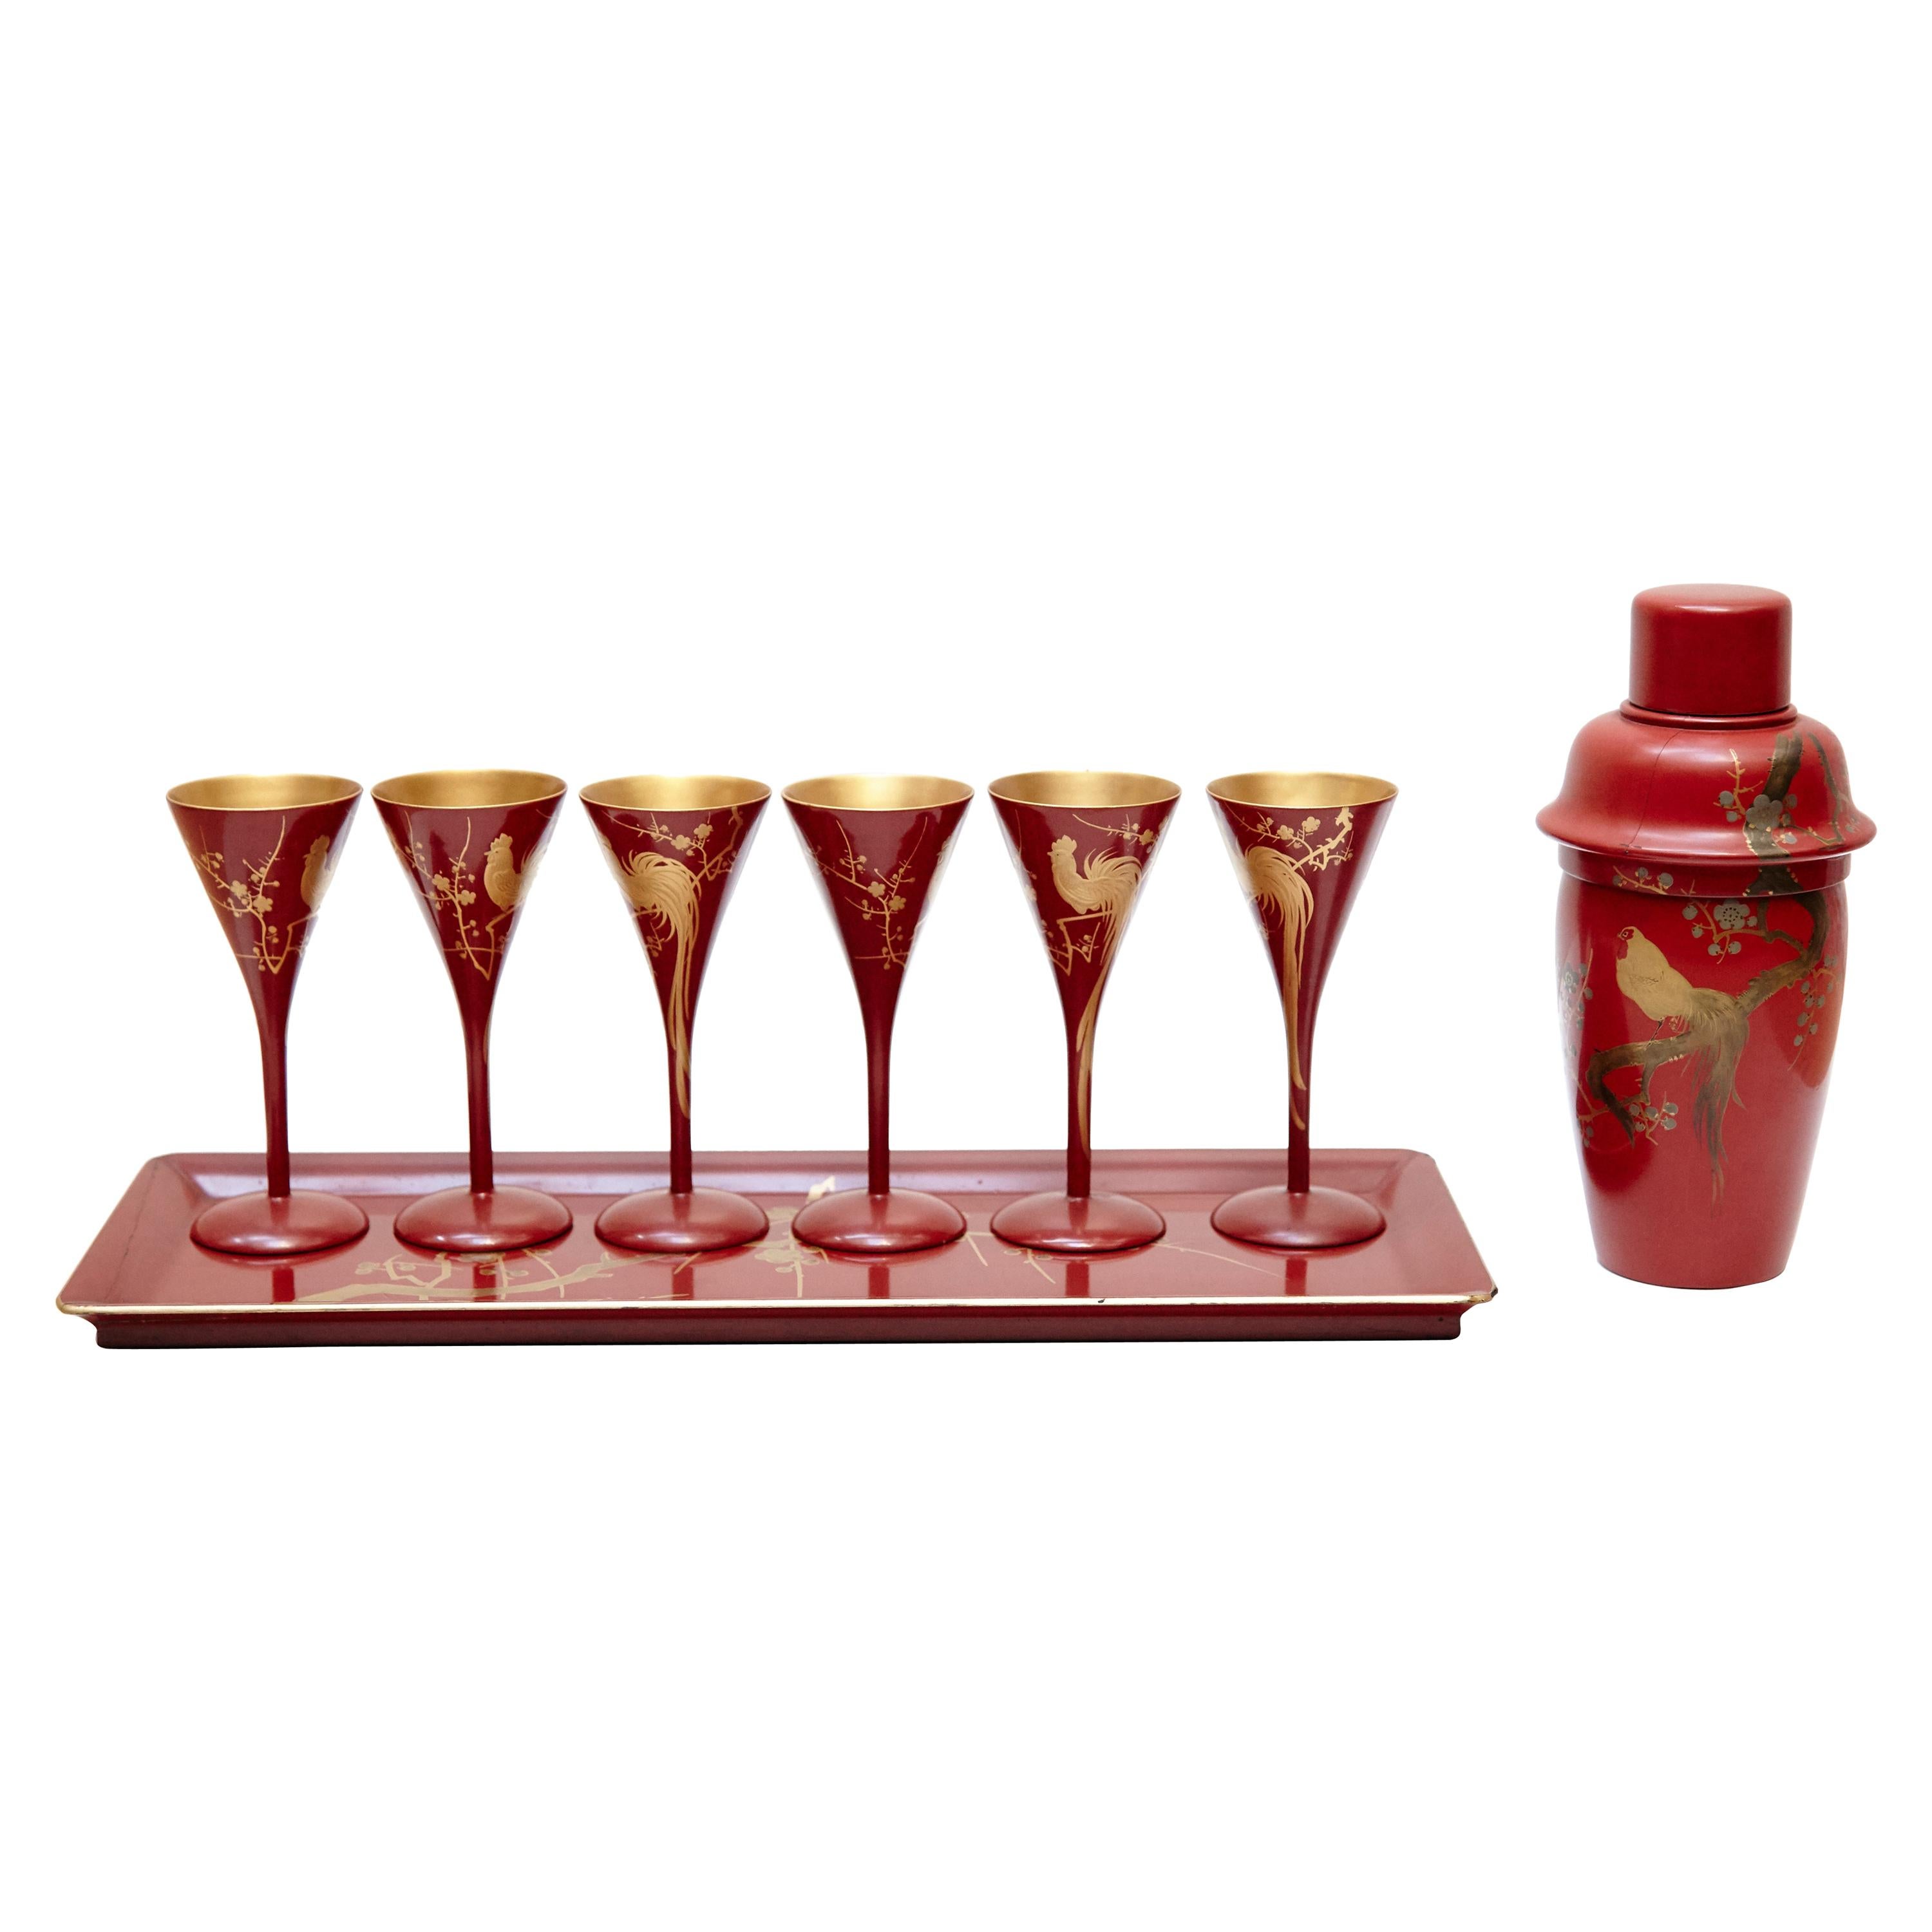 Cocktail Urushi Japanese Red Lacquered Set from England, circa 1910